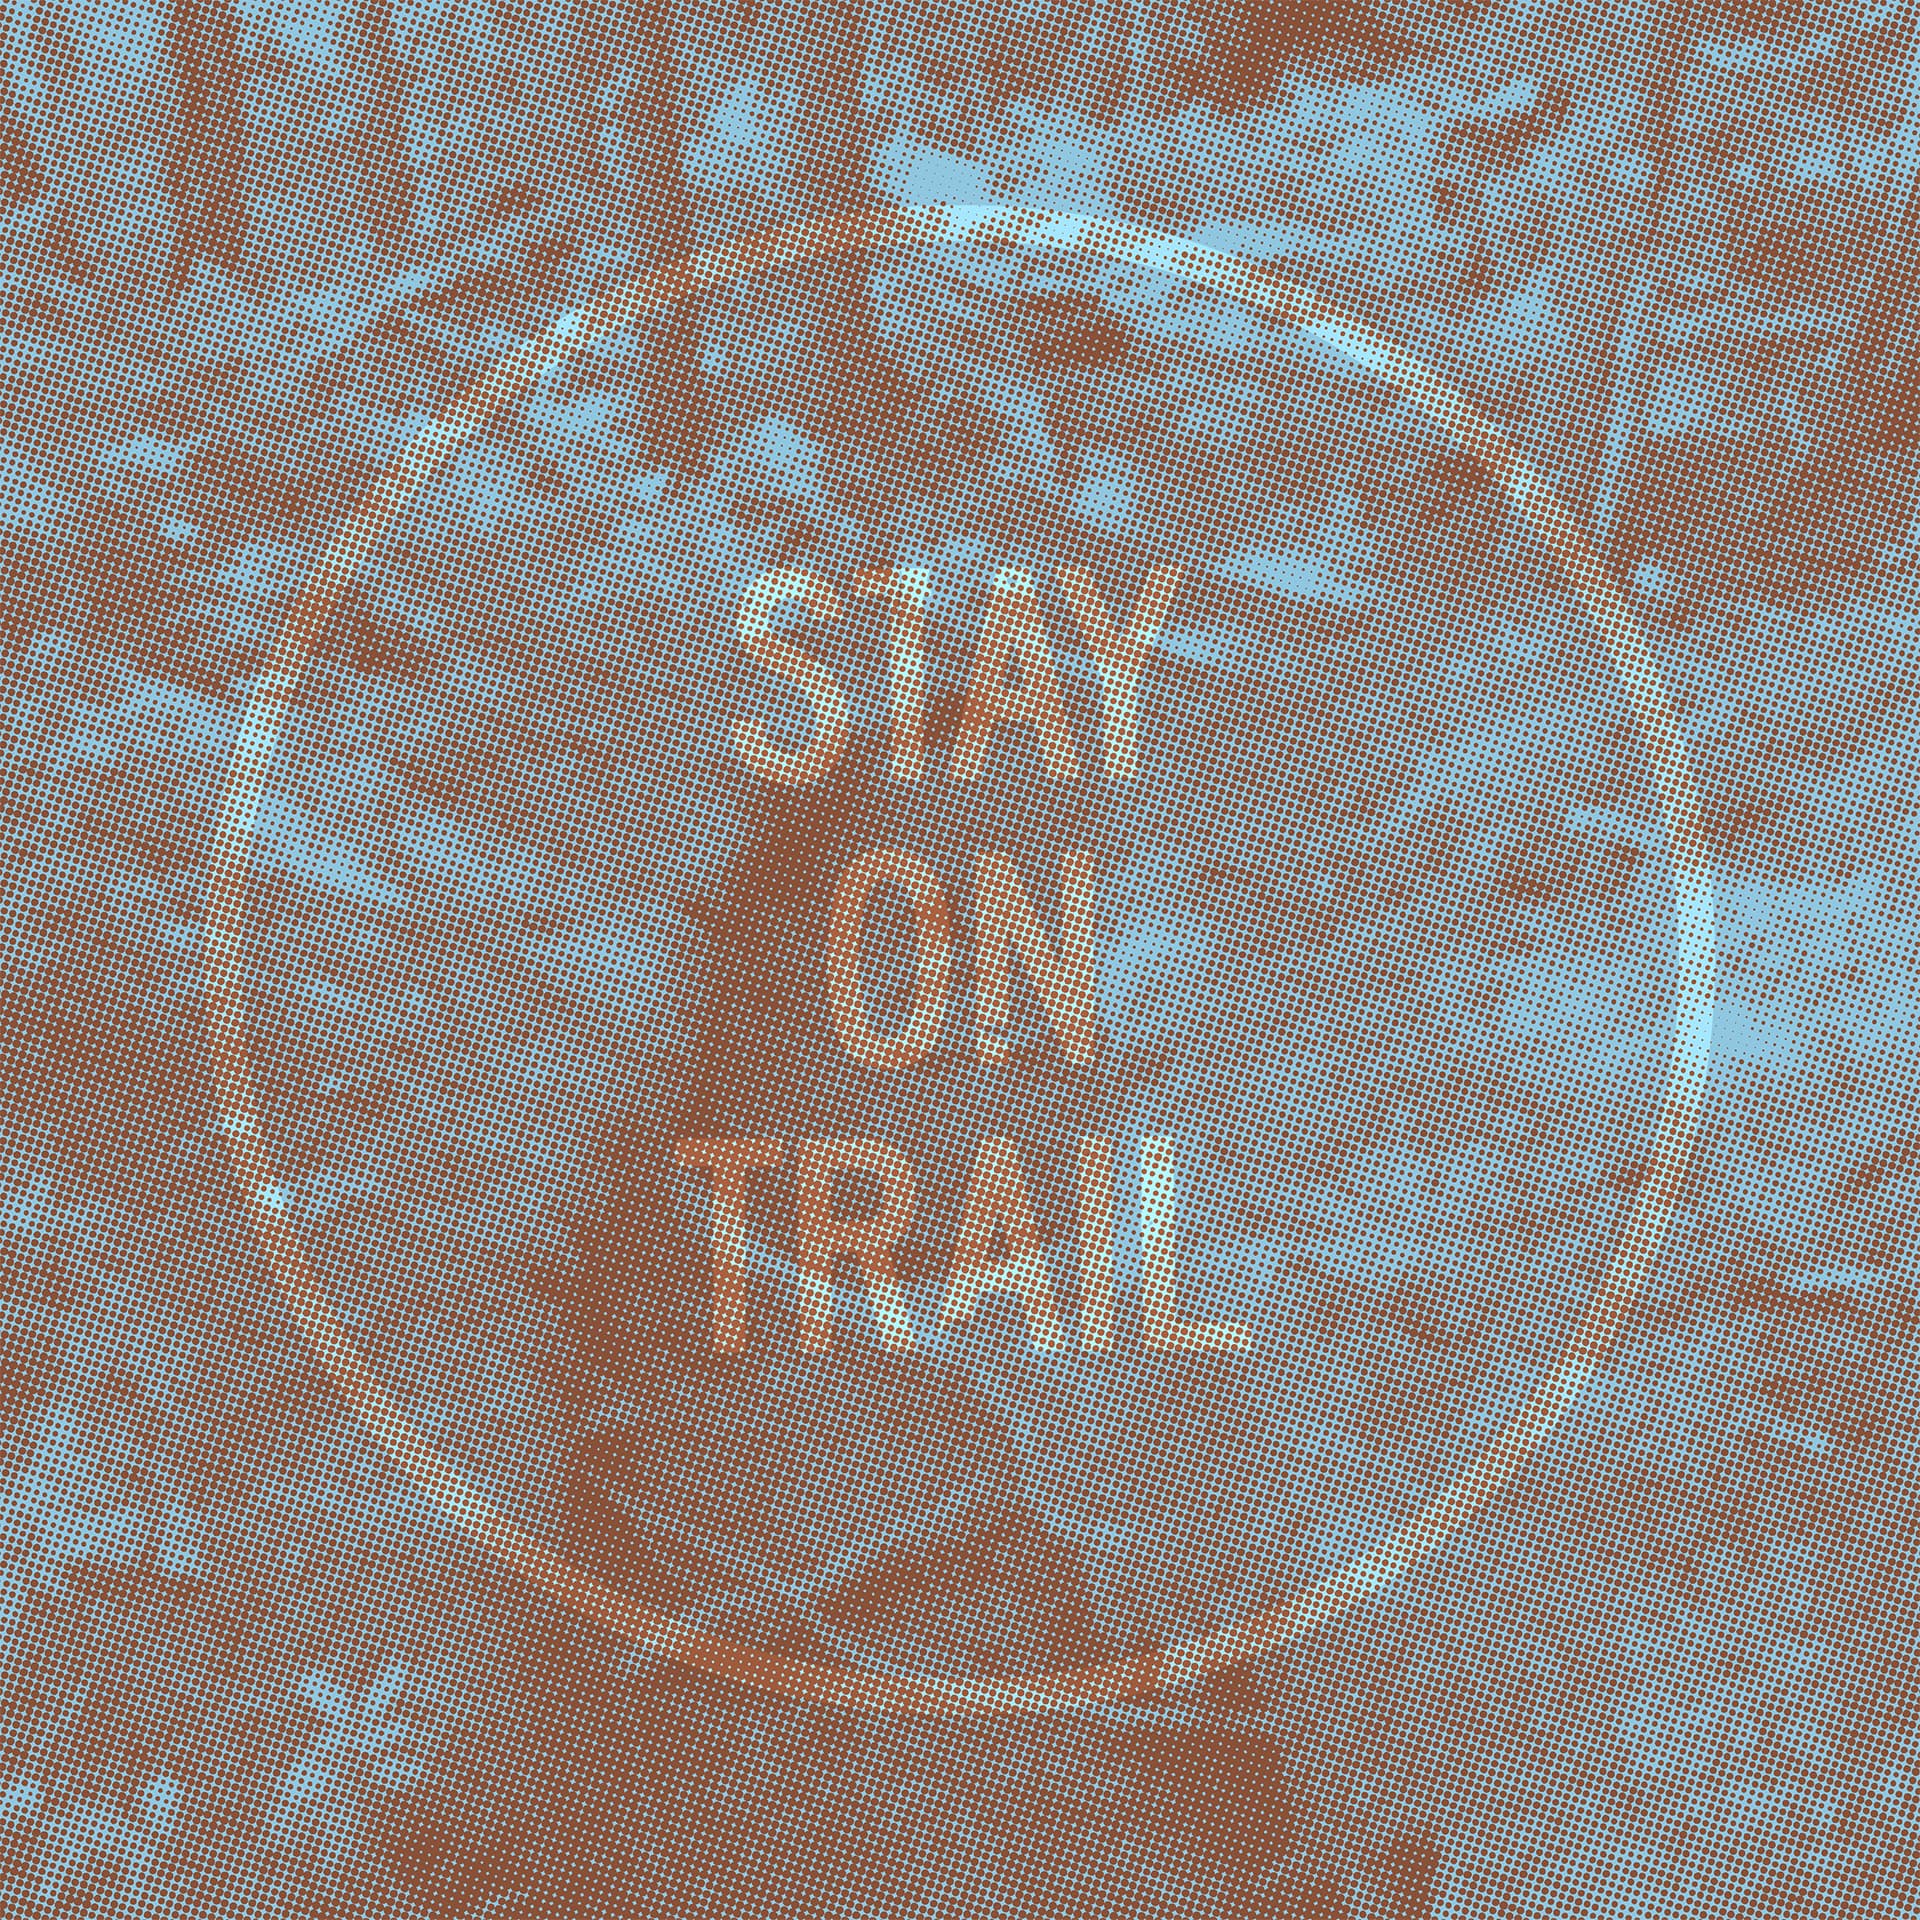 STAY ON TRAIL